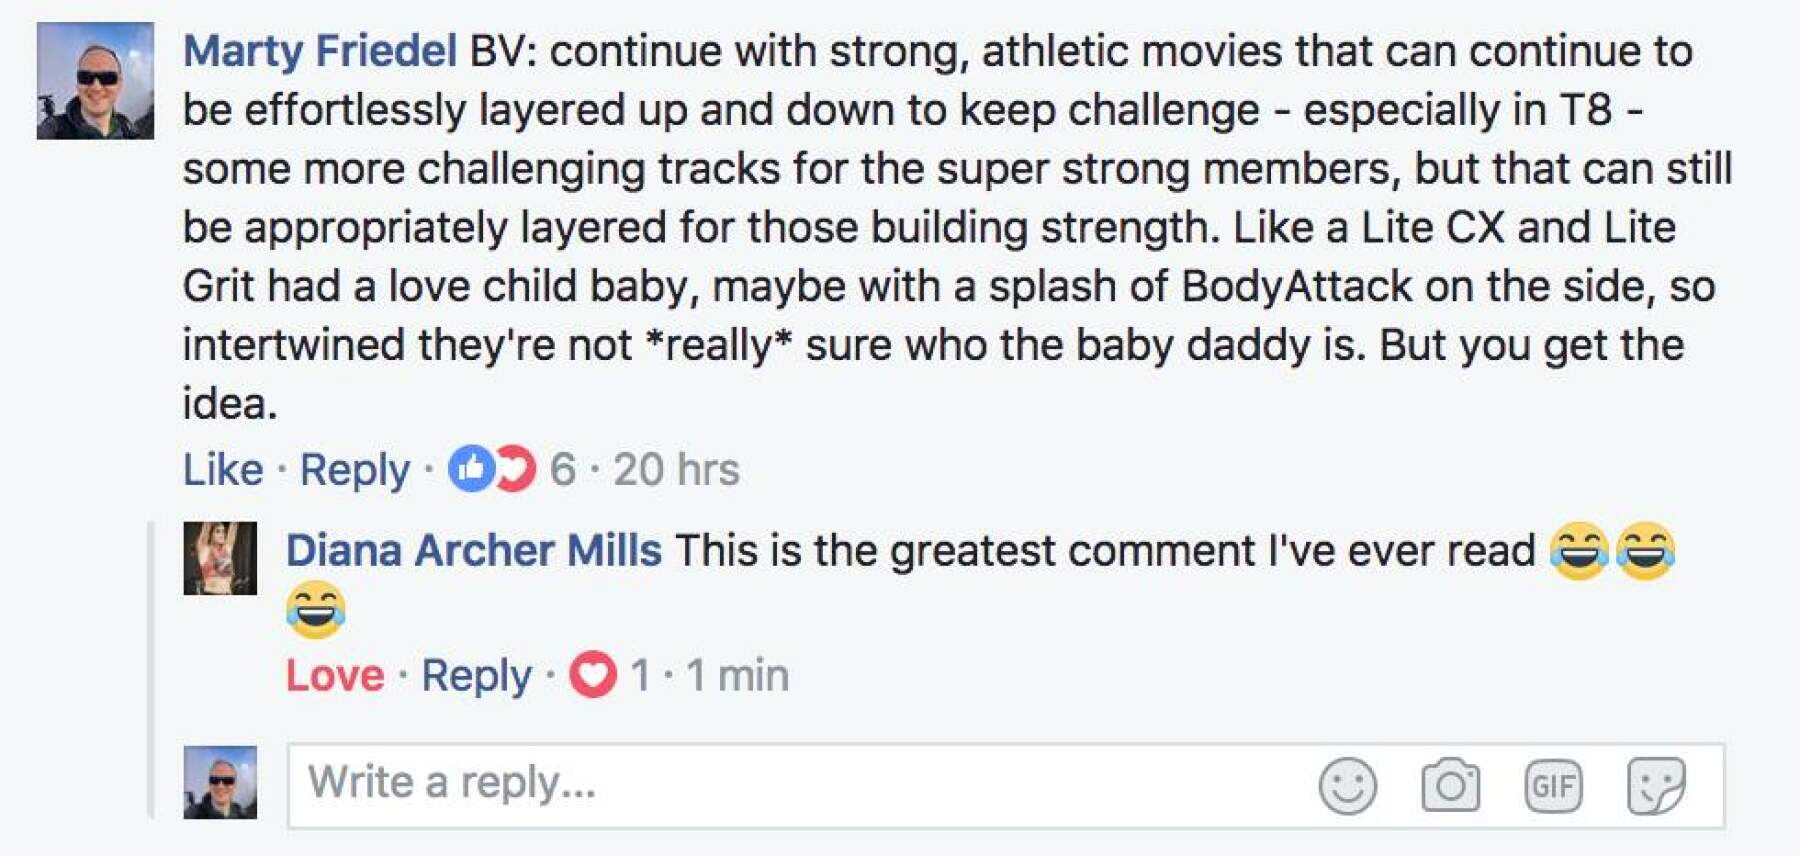 Marty: "Continue with strong, athletic moves that can continue to be effortlessly layered up and down to keep challenge. Like a lite CX and Lite Grit had a love child baby, maybe with a splash of BodyAttack on the side, so intertwined they're not really sure who the baby daddy is."  Diana: "This is the greatest comment I've ever read"